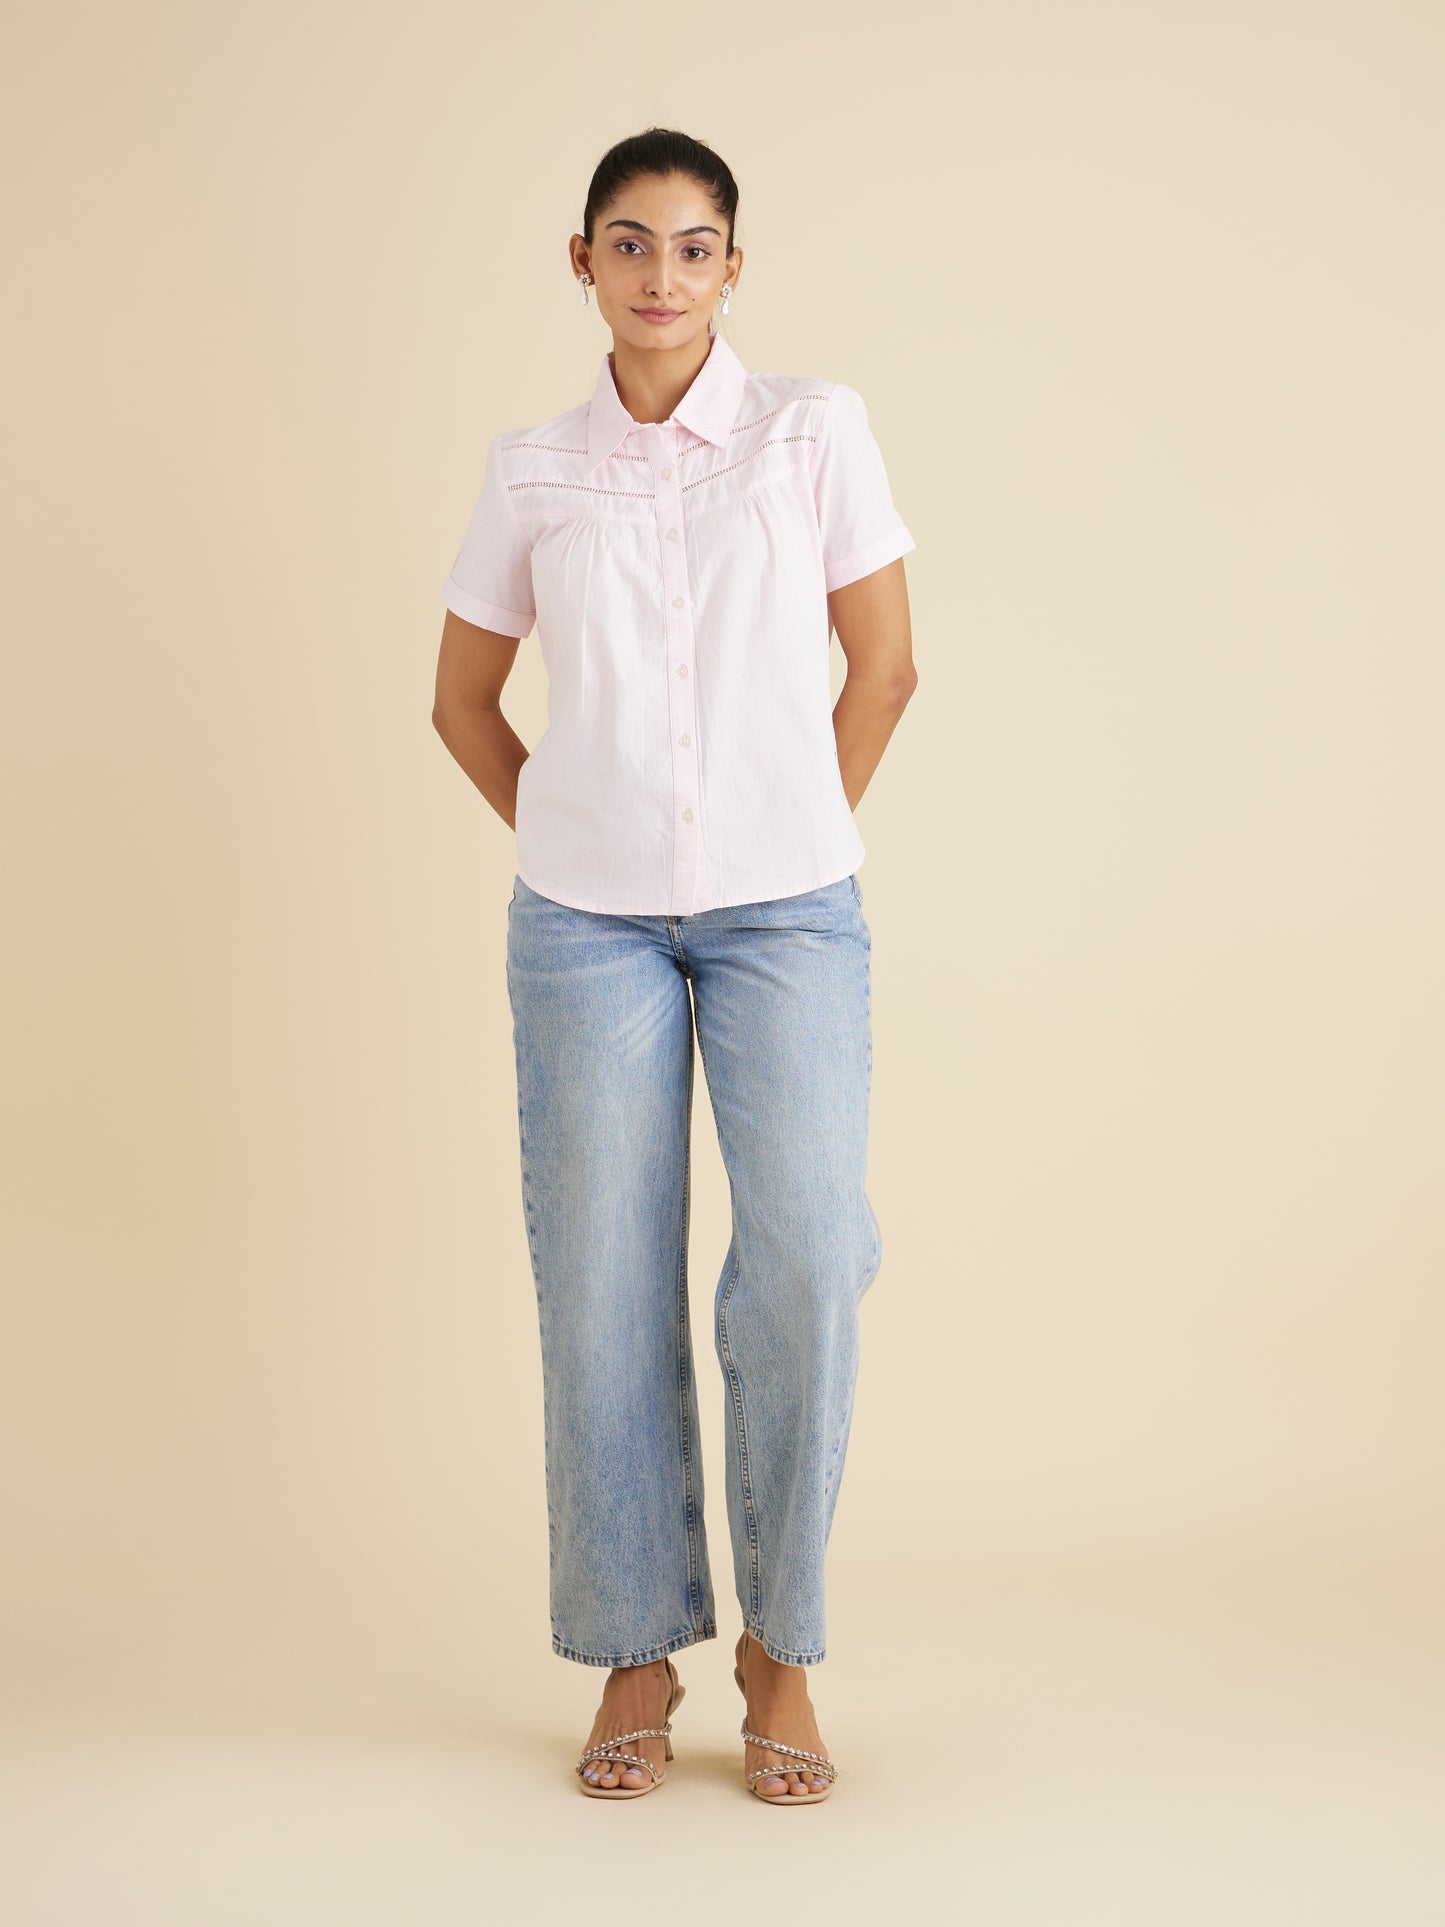 The Anmyeondo Top Light Pink